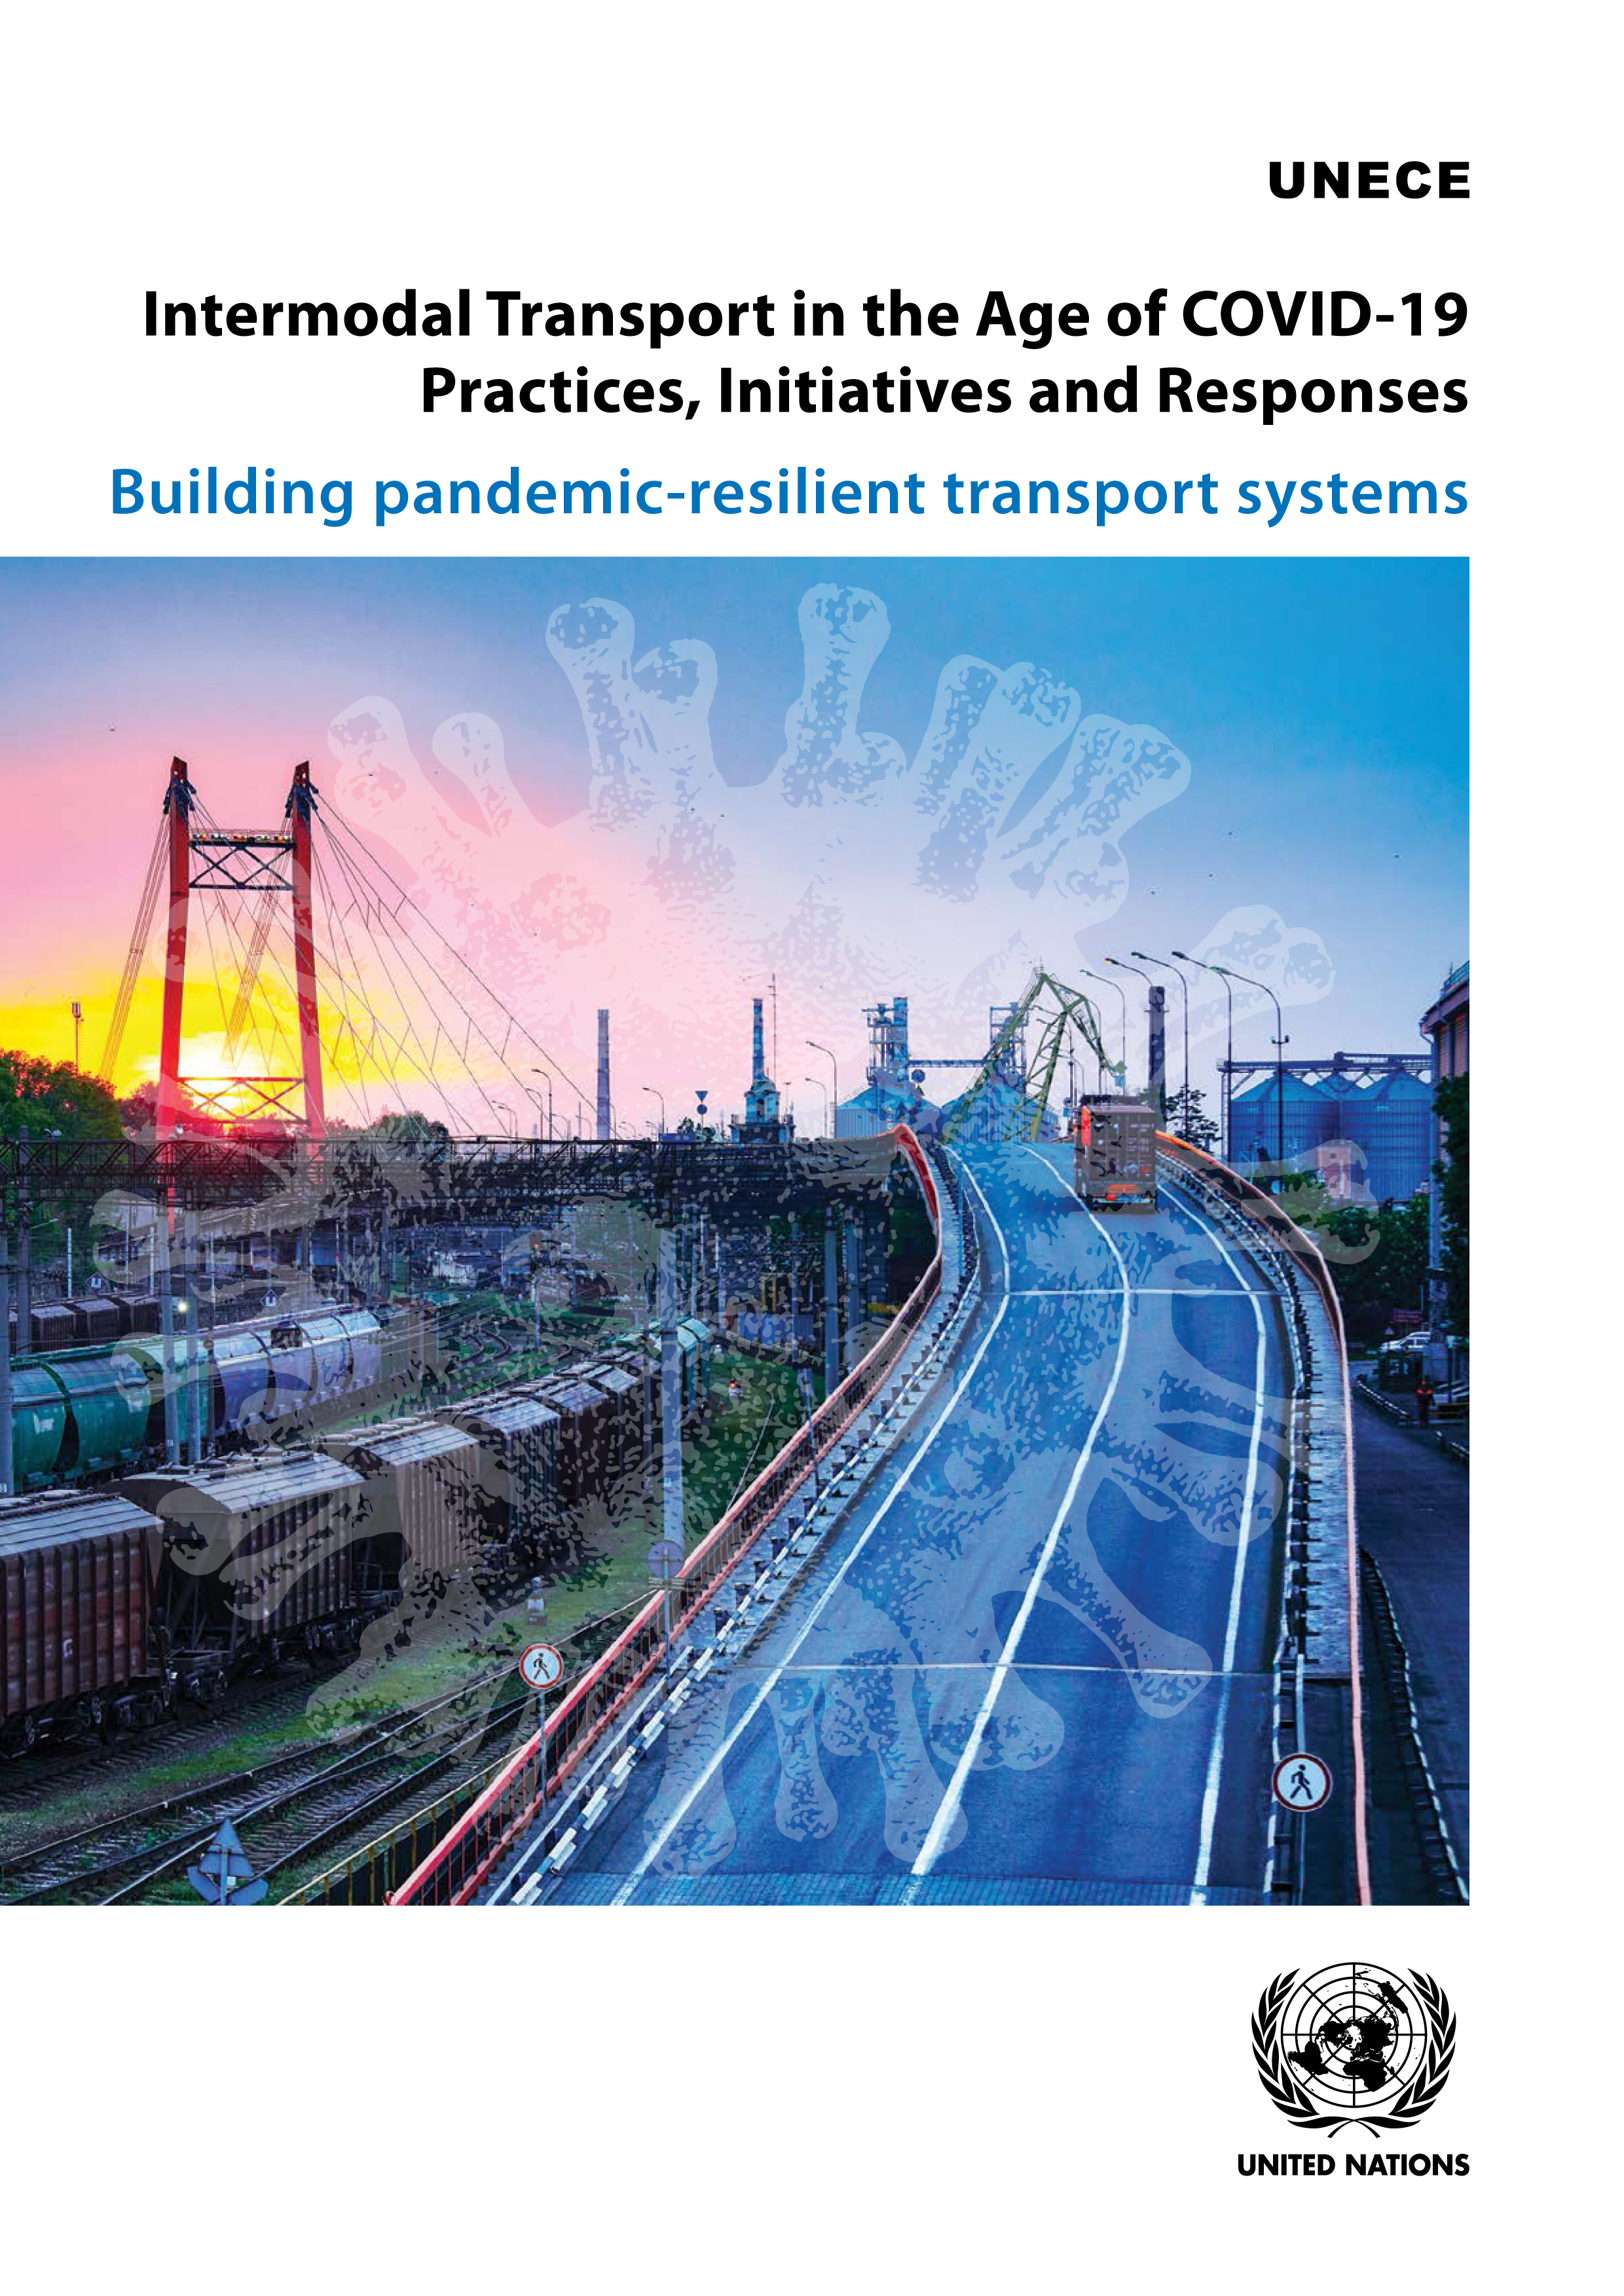 image of Intermodal Transport in the Age of COVID-19 Practices, Initiatives and Responses